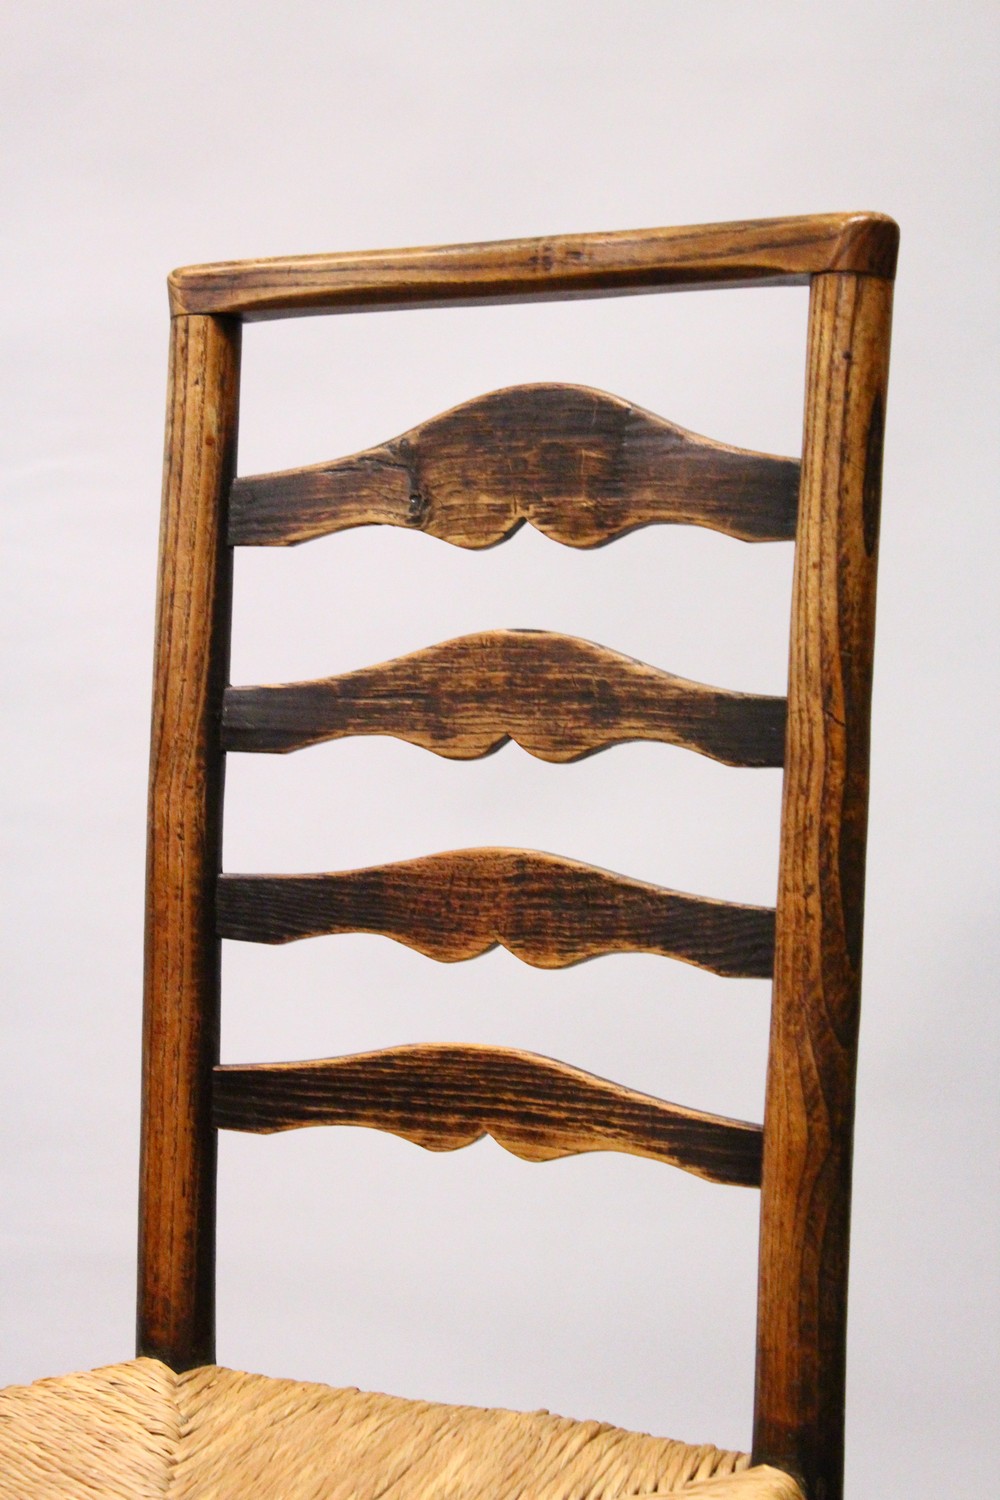 A MATCHED SET OF SIX 19TH CENTURY ASH AND ELM LADDER BACK DINING CHAIRS, two with arms, with rush - Image 3 of 8